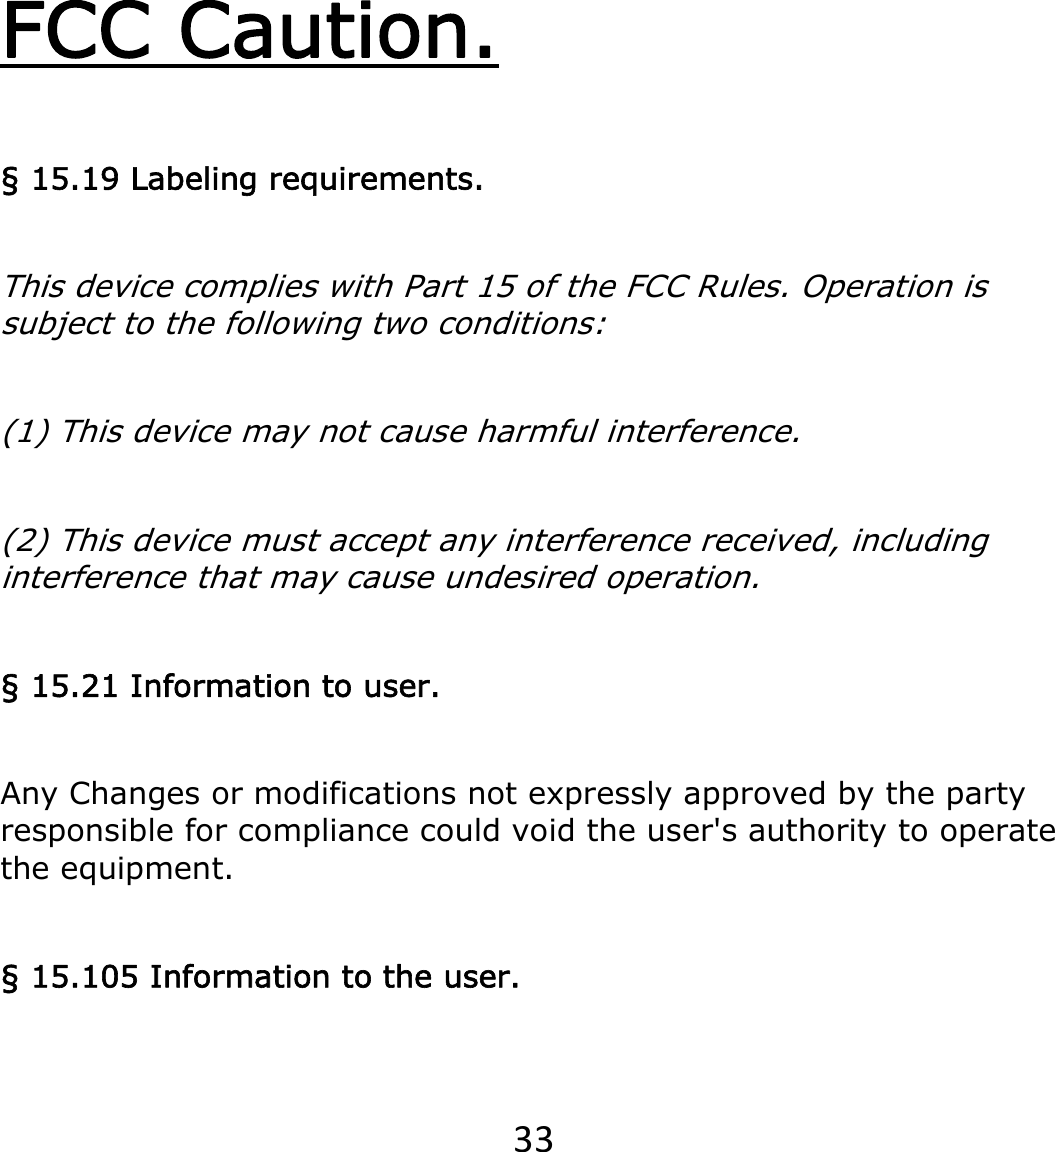 33FCC Caution. § 15.19 Labeling requirements. This device complies with Part 15 of the FCC Rules. Operation is subject to the following two conditions:  (1) This device may not cause harmful interference.  (2) This device must accept any interference received, including interference that may cause undesired operation. § 15.21 Information to user. Any Changes or modifications not expressly approved by the party responsible for compliance could void the user&apos;s authority to operate the equipment. § 15.105 Information to the user. 